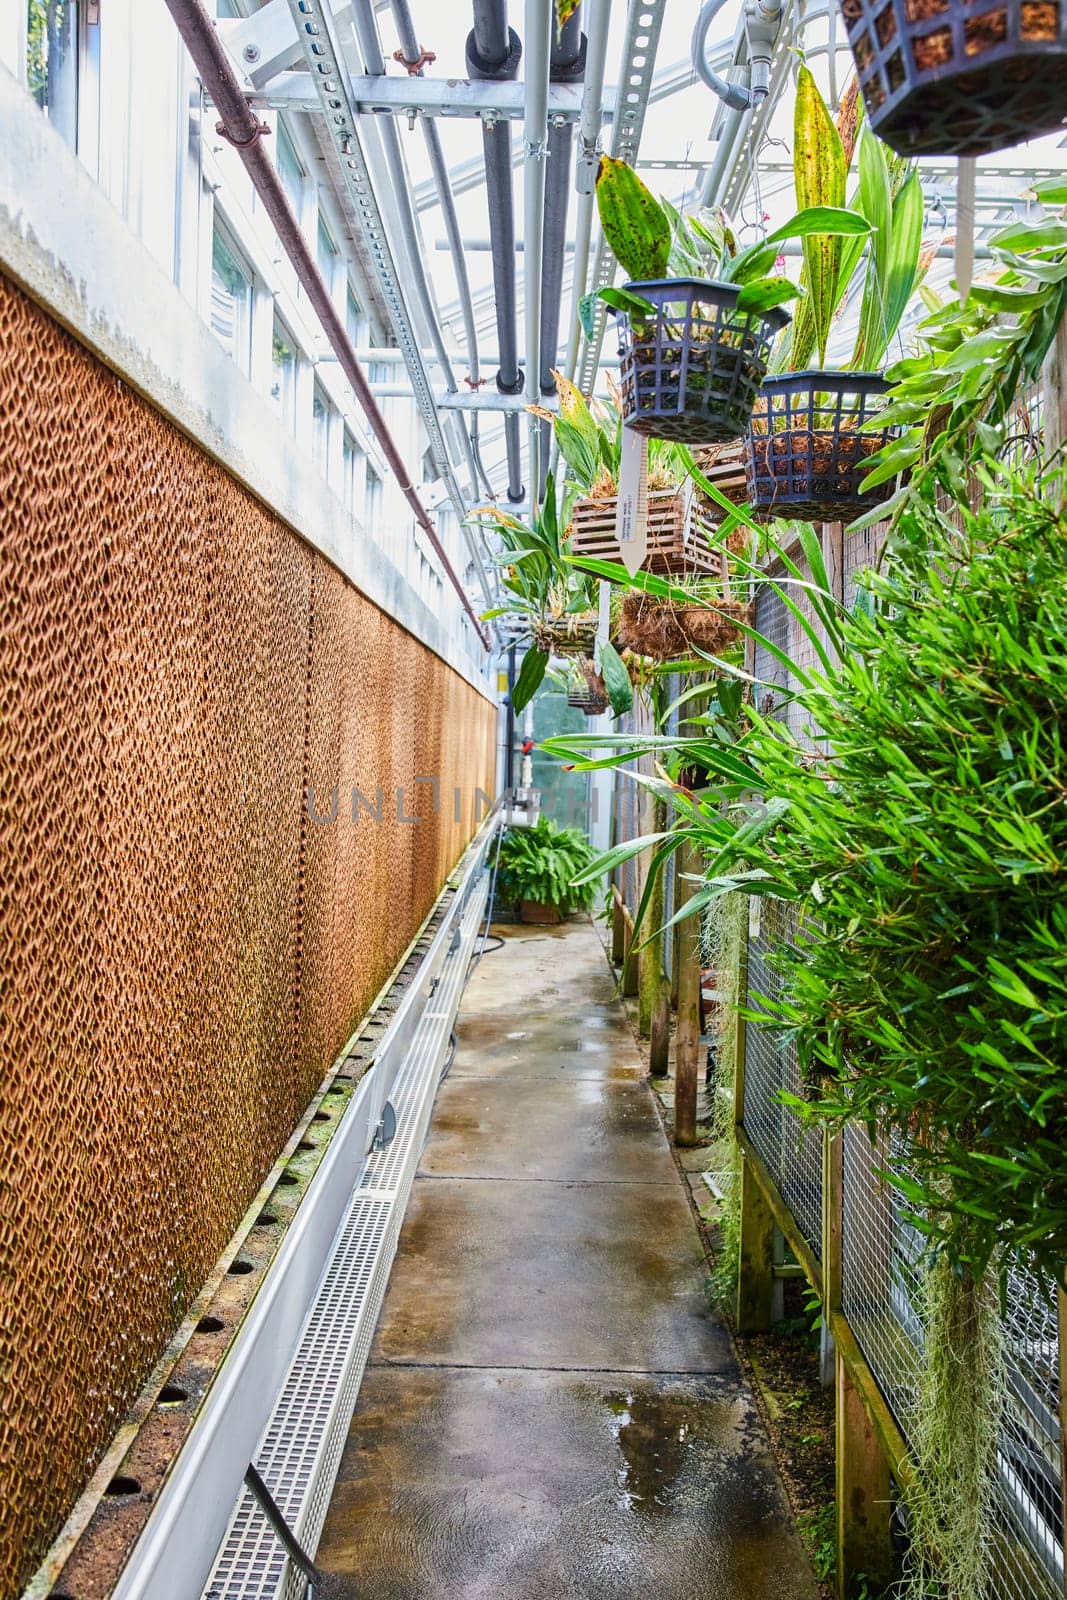 Lush Greenhouse Oasis with Tropical Plants and Rustic Wall by njproductions